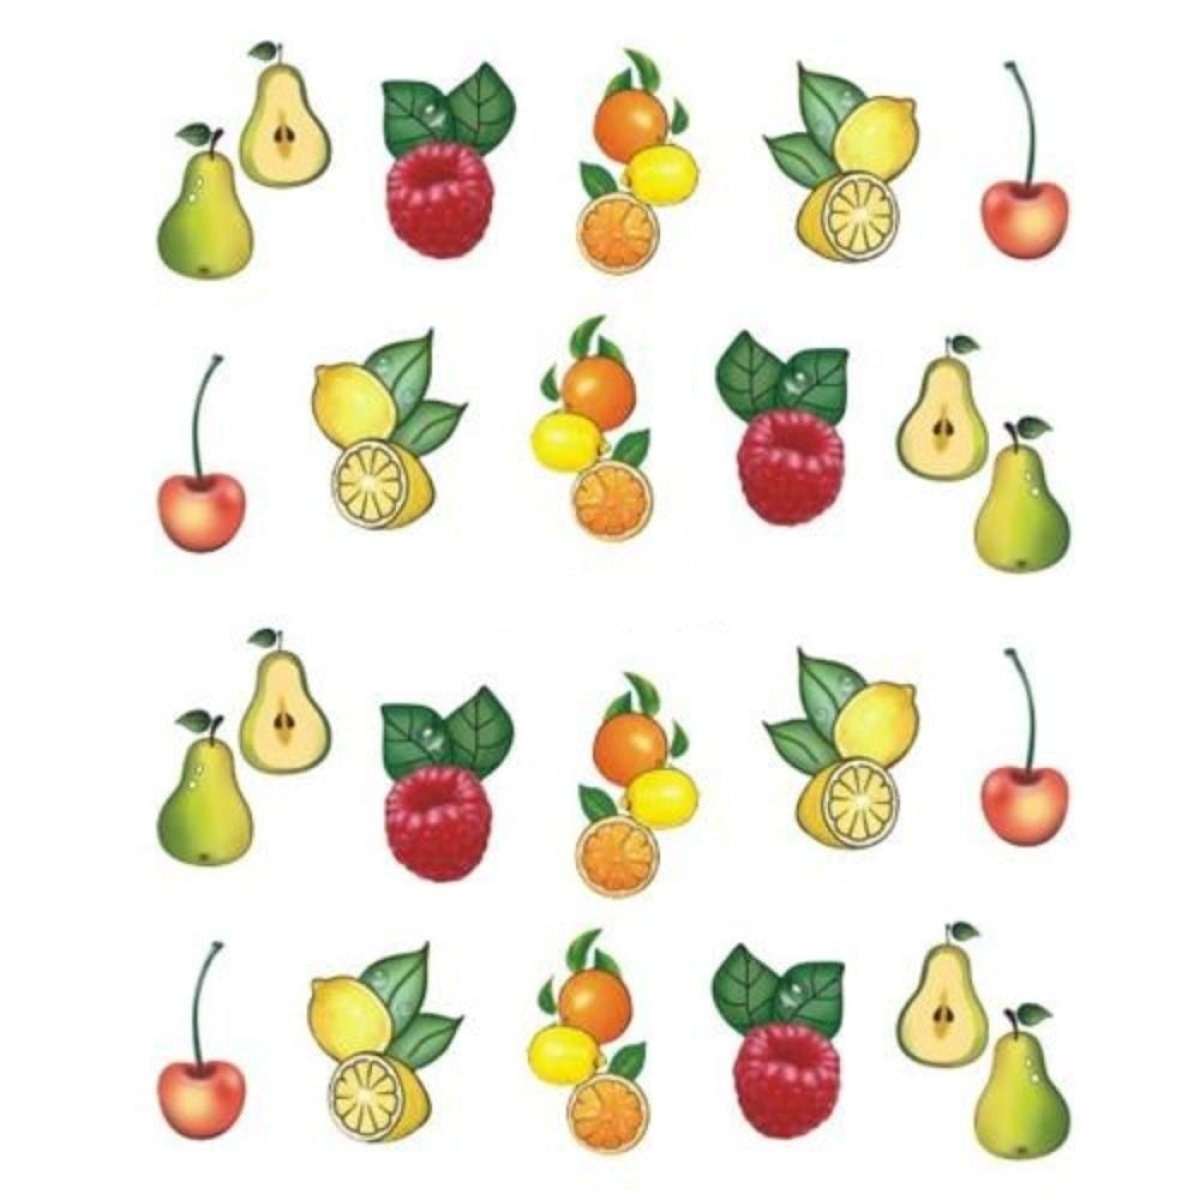 Strawberry Summer Cake & Fruit Stickers For Nails Nail Manicure Art Stz-495 - Sheet